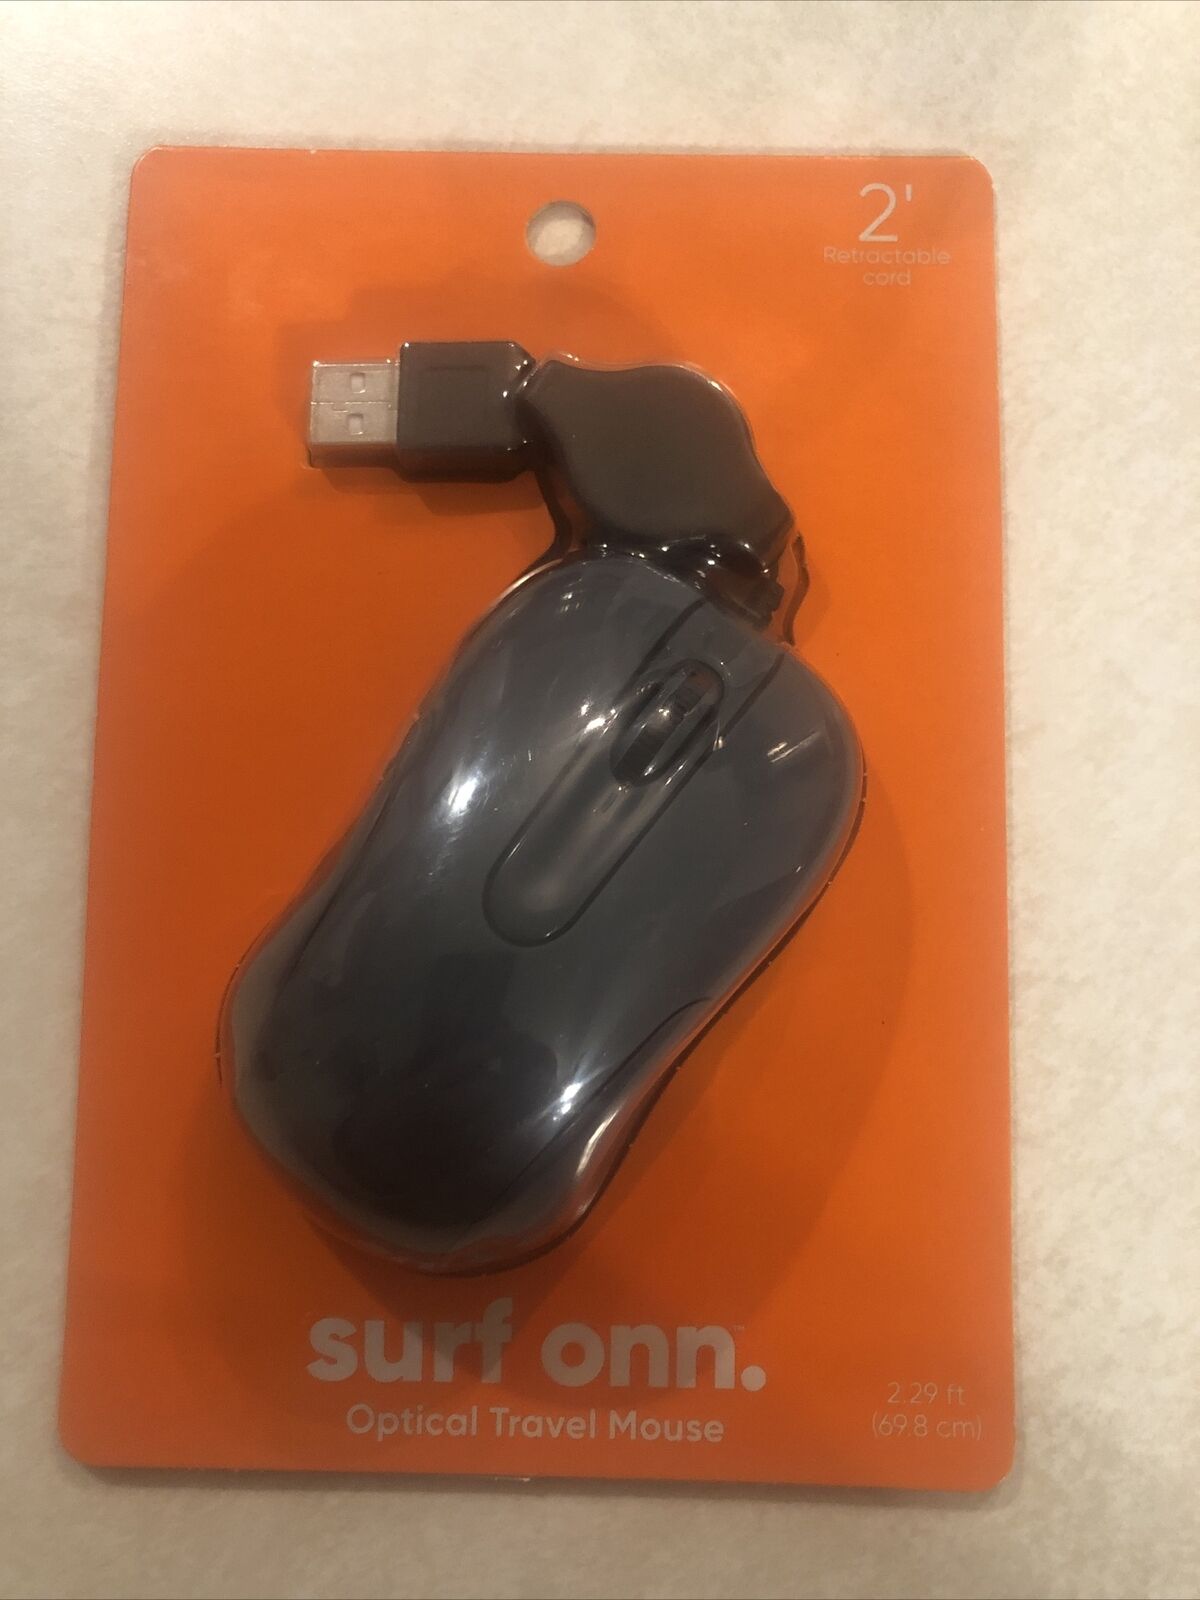 ONN Travel Mouse 3 Button w/ Retractable USB Cord Scroll Wheel Either Hand, New